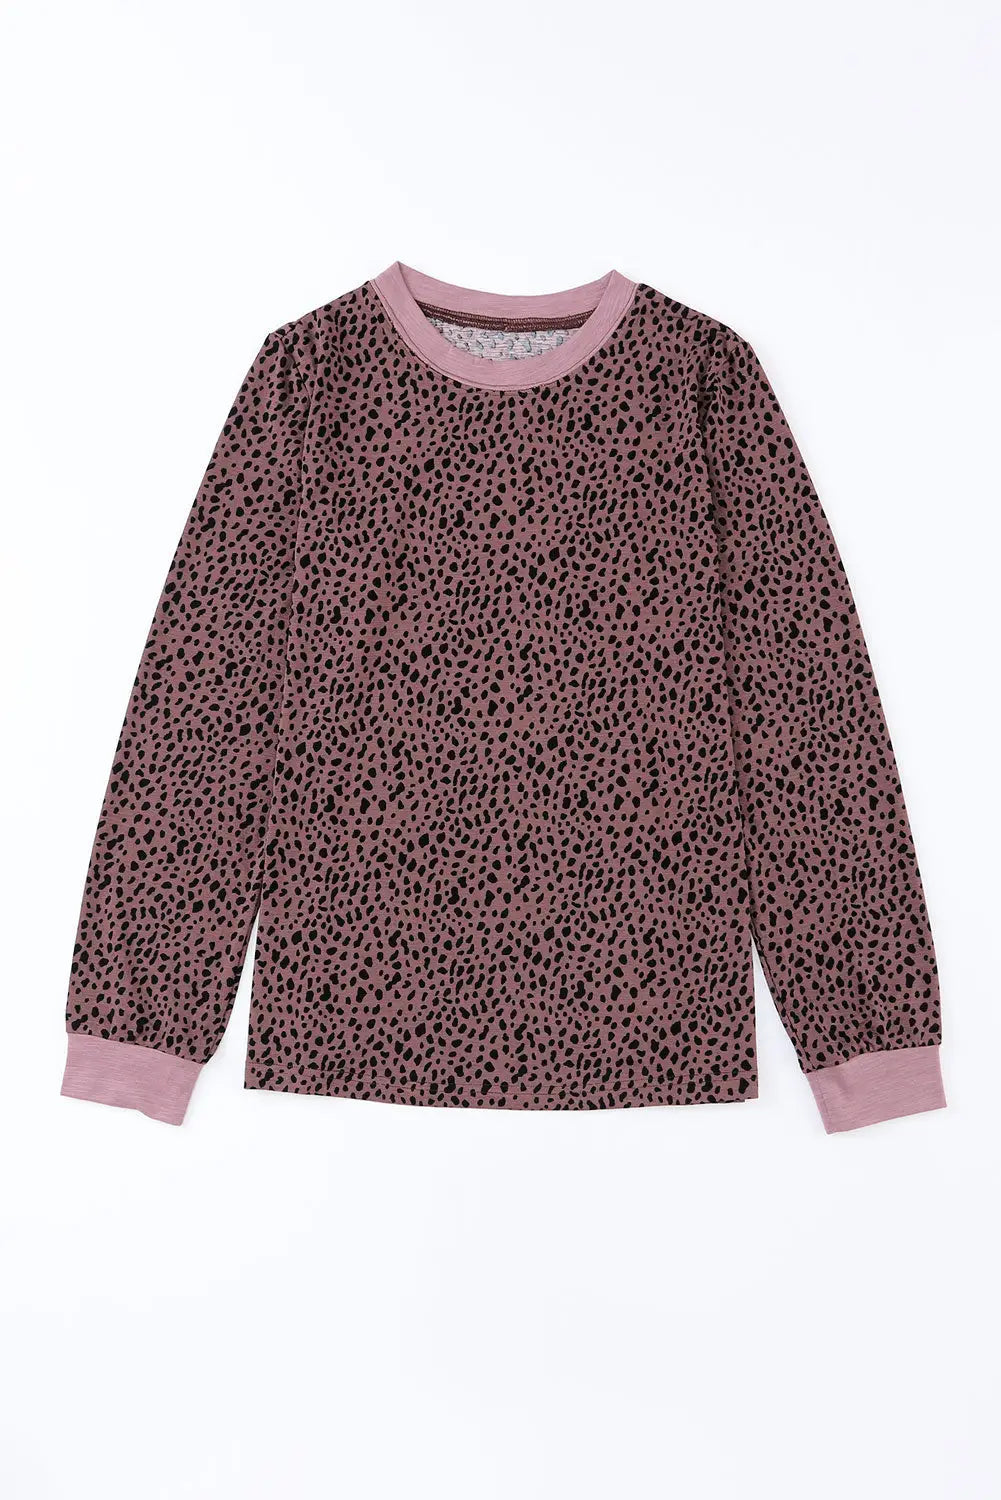 Animal Spotted Print Round Neck Long Sleeve Top-3